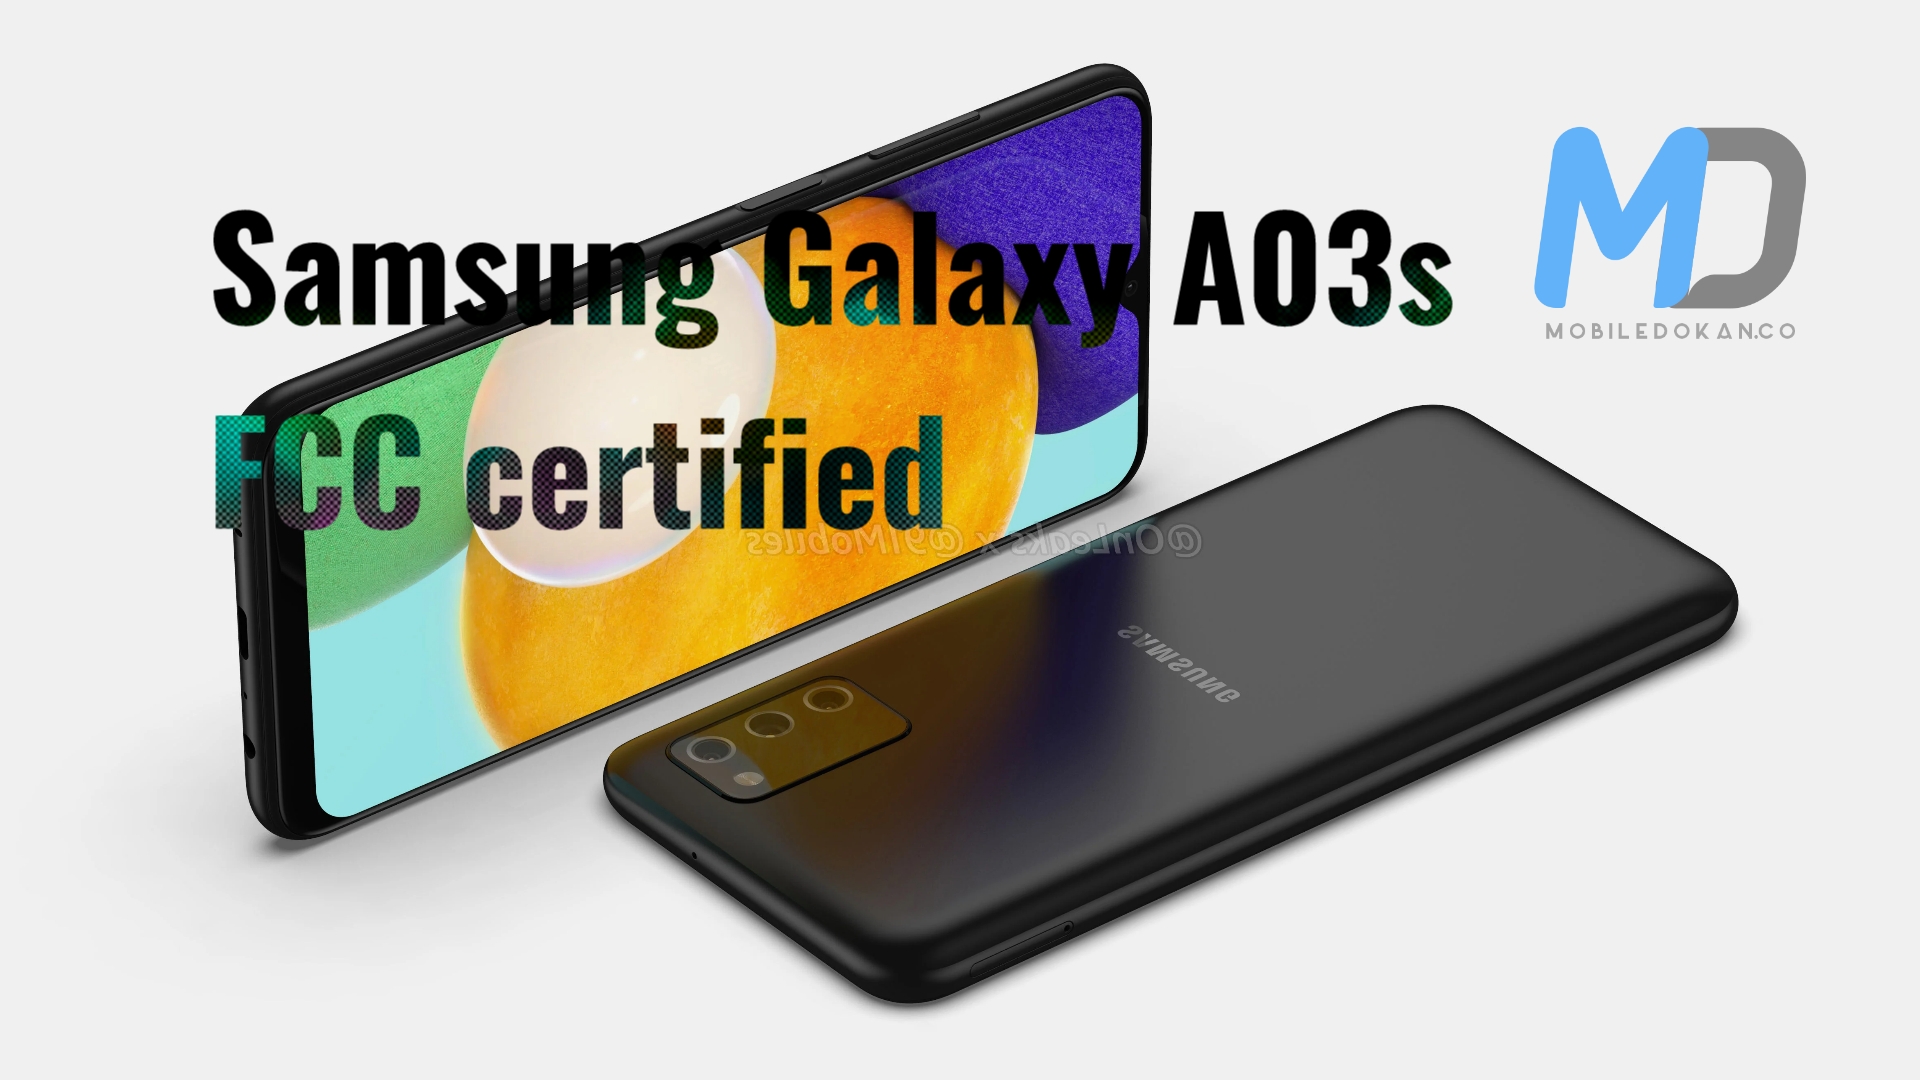 Samsung Galaxy A03s gets FCC certified and ahead of launch soon